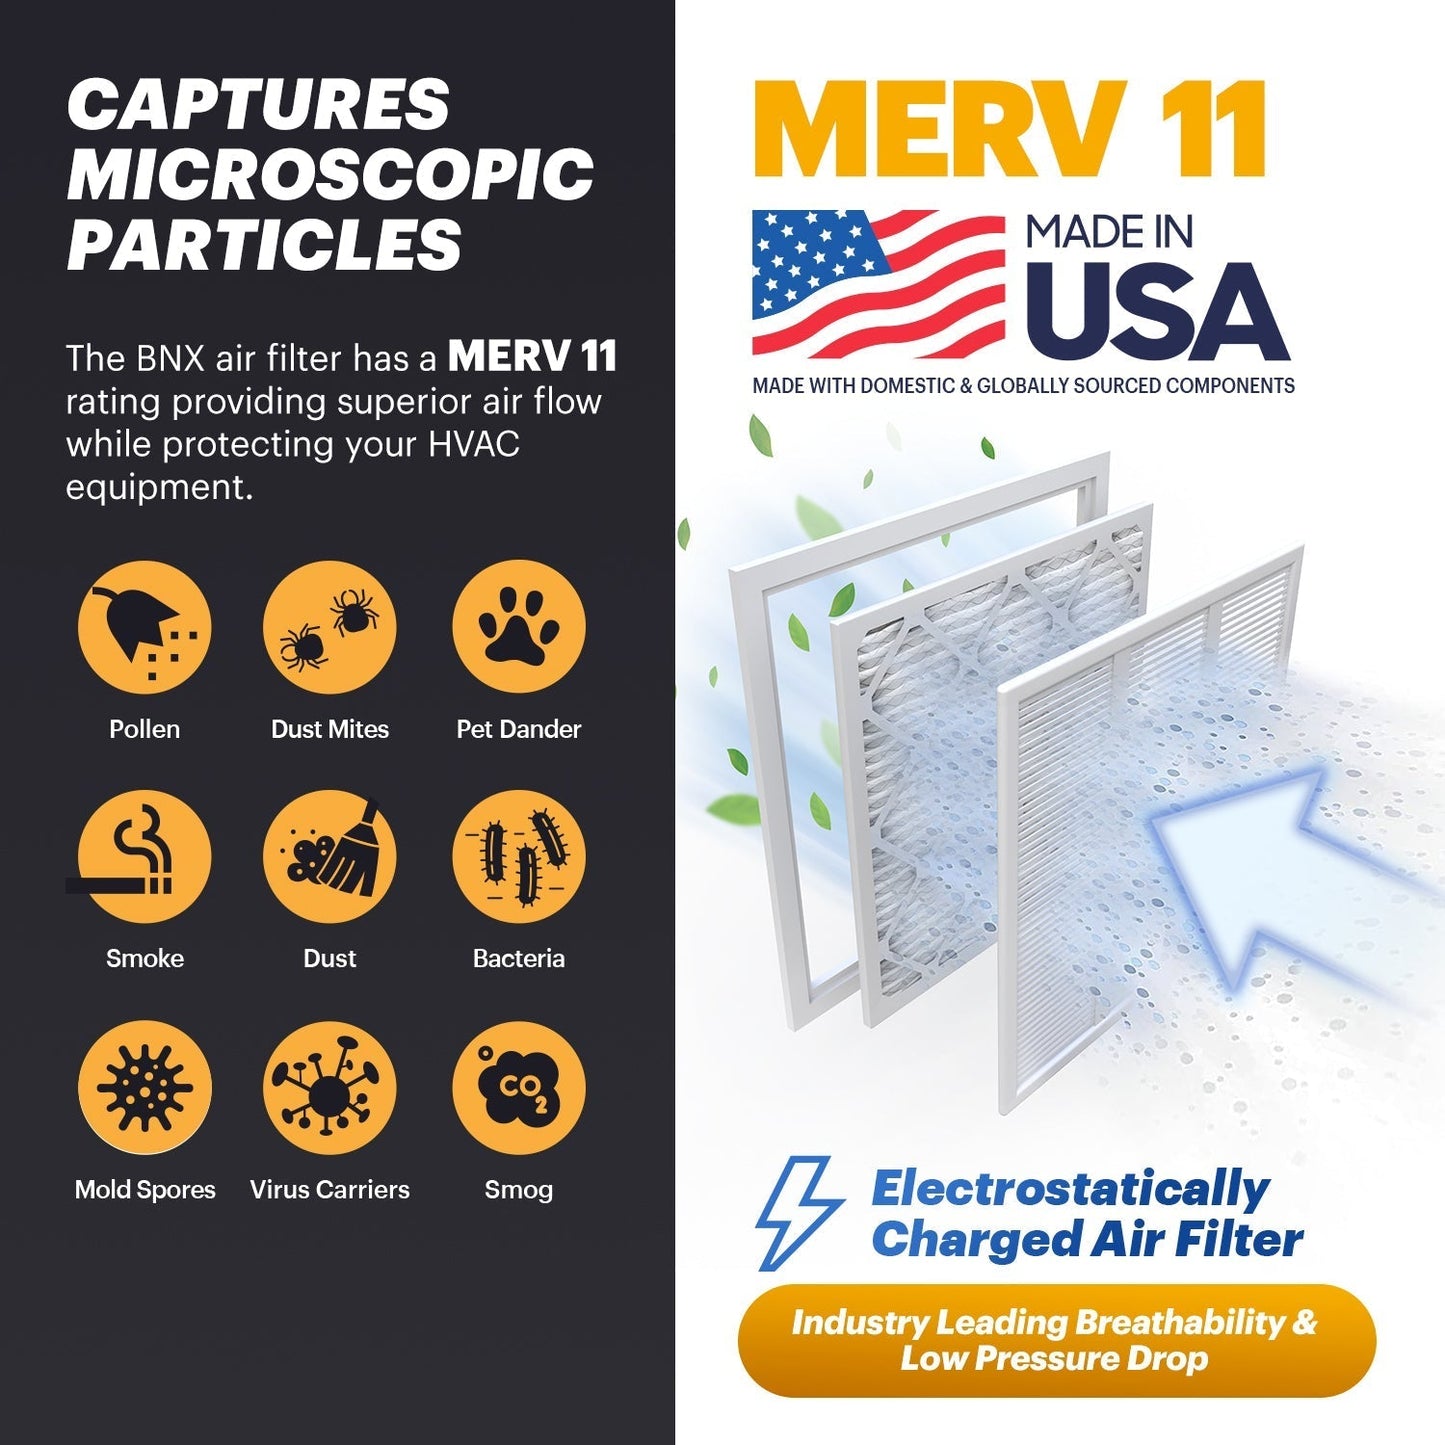 BNX 20x25x1 MERV 11 Air Filter 3 Pack - MADE IN USA - Electrostatic Pleated Air Conditioner HVAC AC Furnace Filters - Removes Dust, Mold, Pollen, Lint, Pet Dander, Smoke, Smog